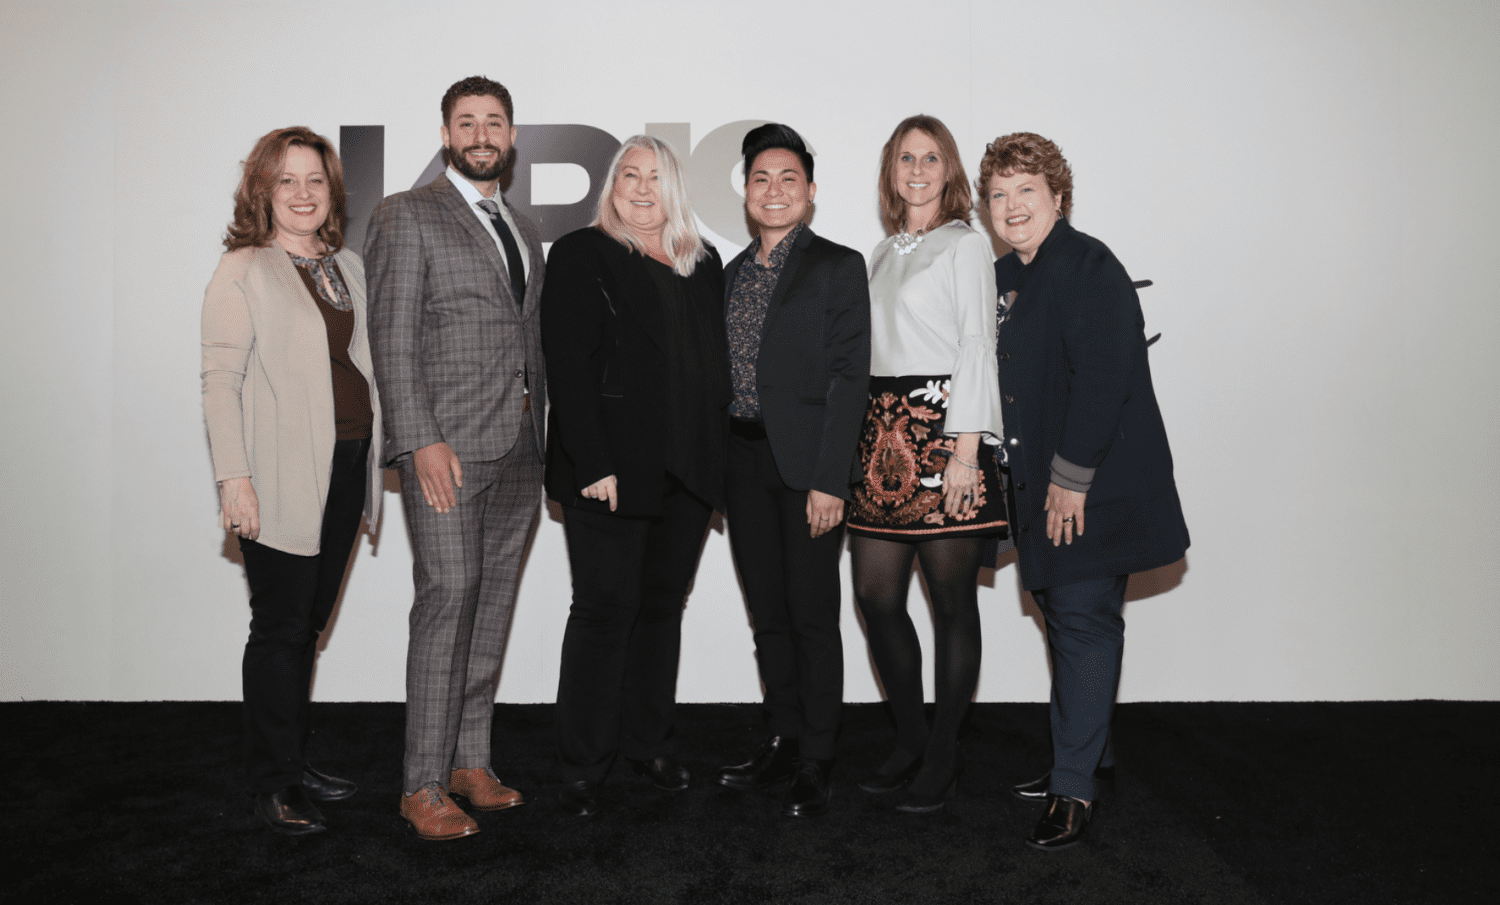 Bilotta kitchen designer, Aston Smith (second from right), served on the judging committee for the prestigious 2019 Kitchen & Bath Industry Show.